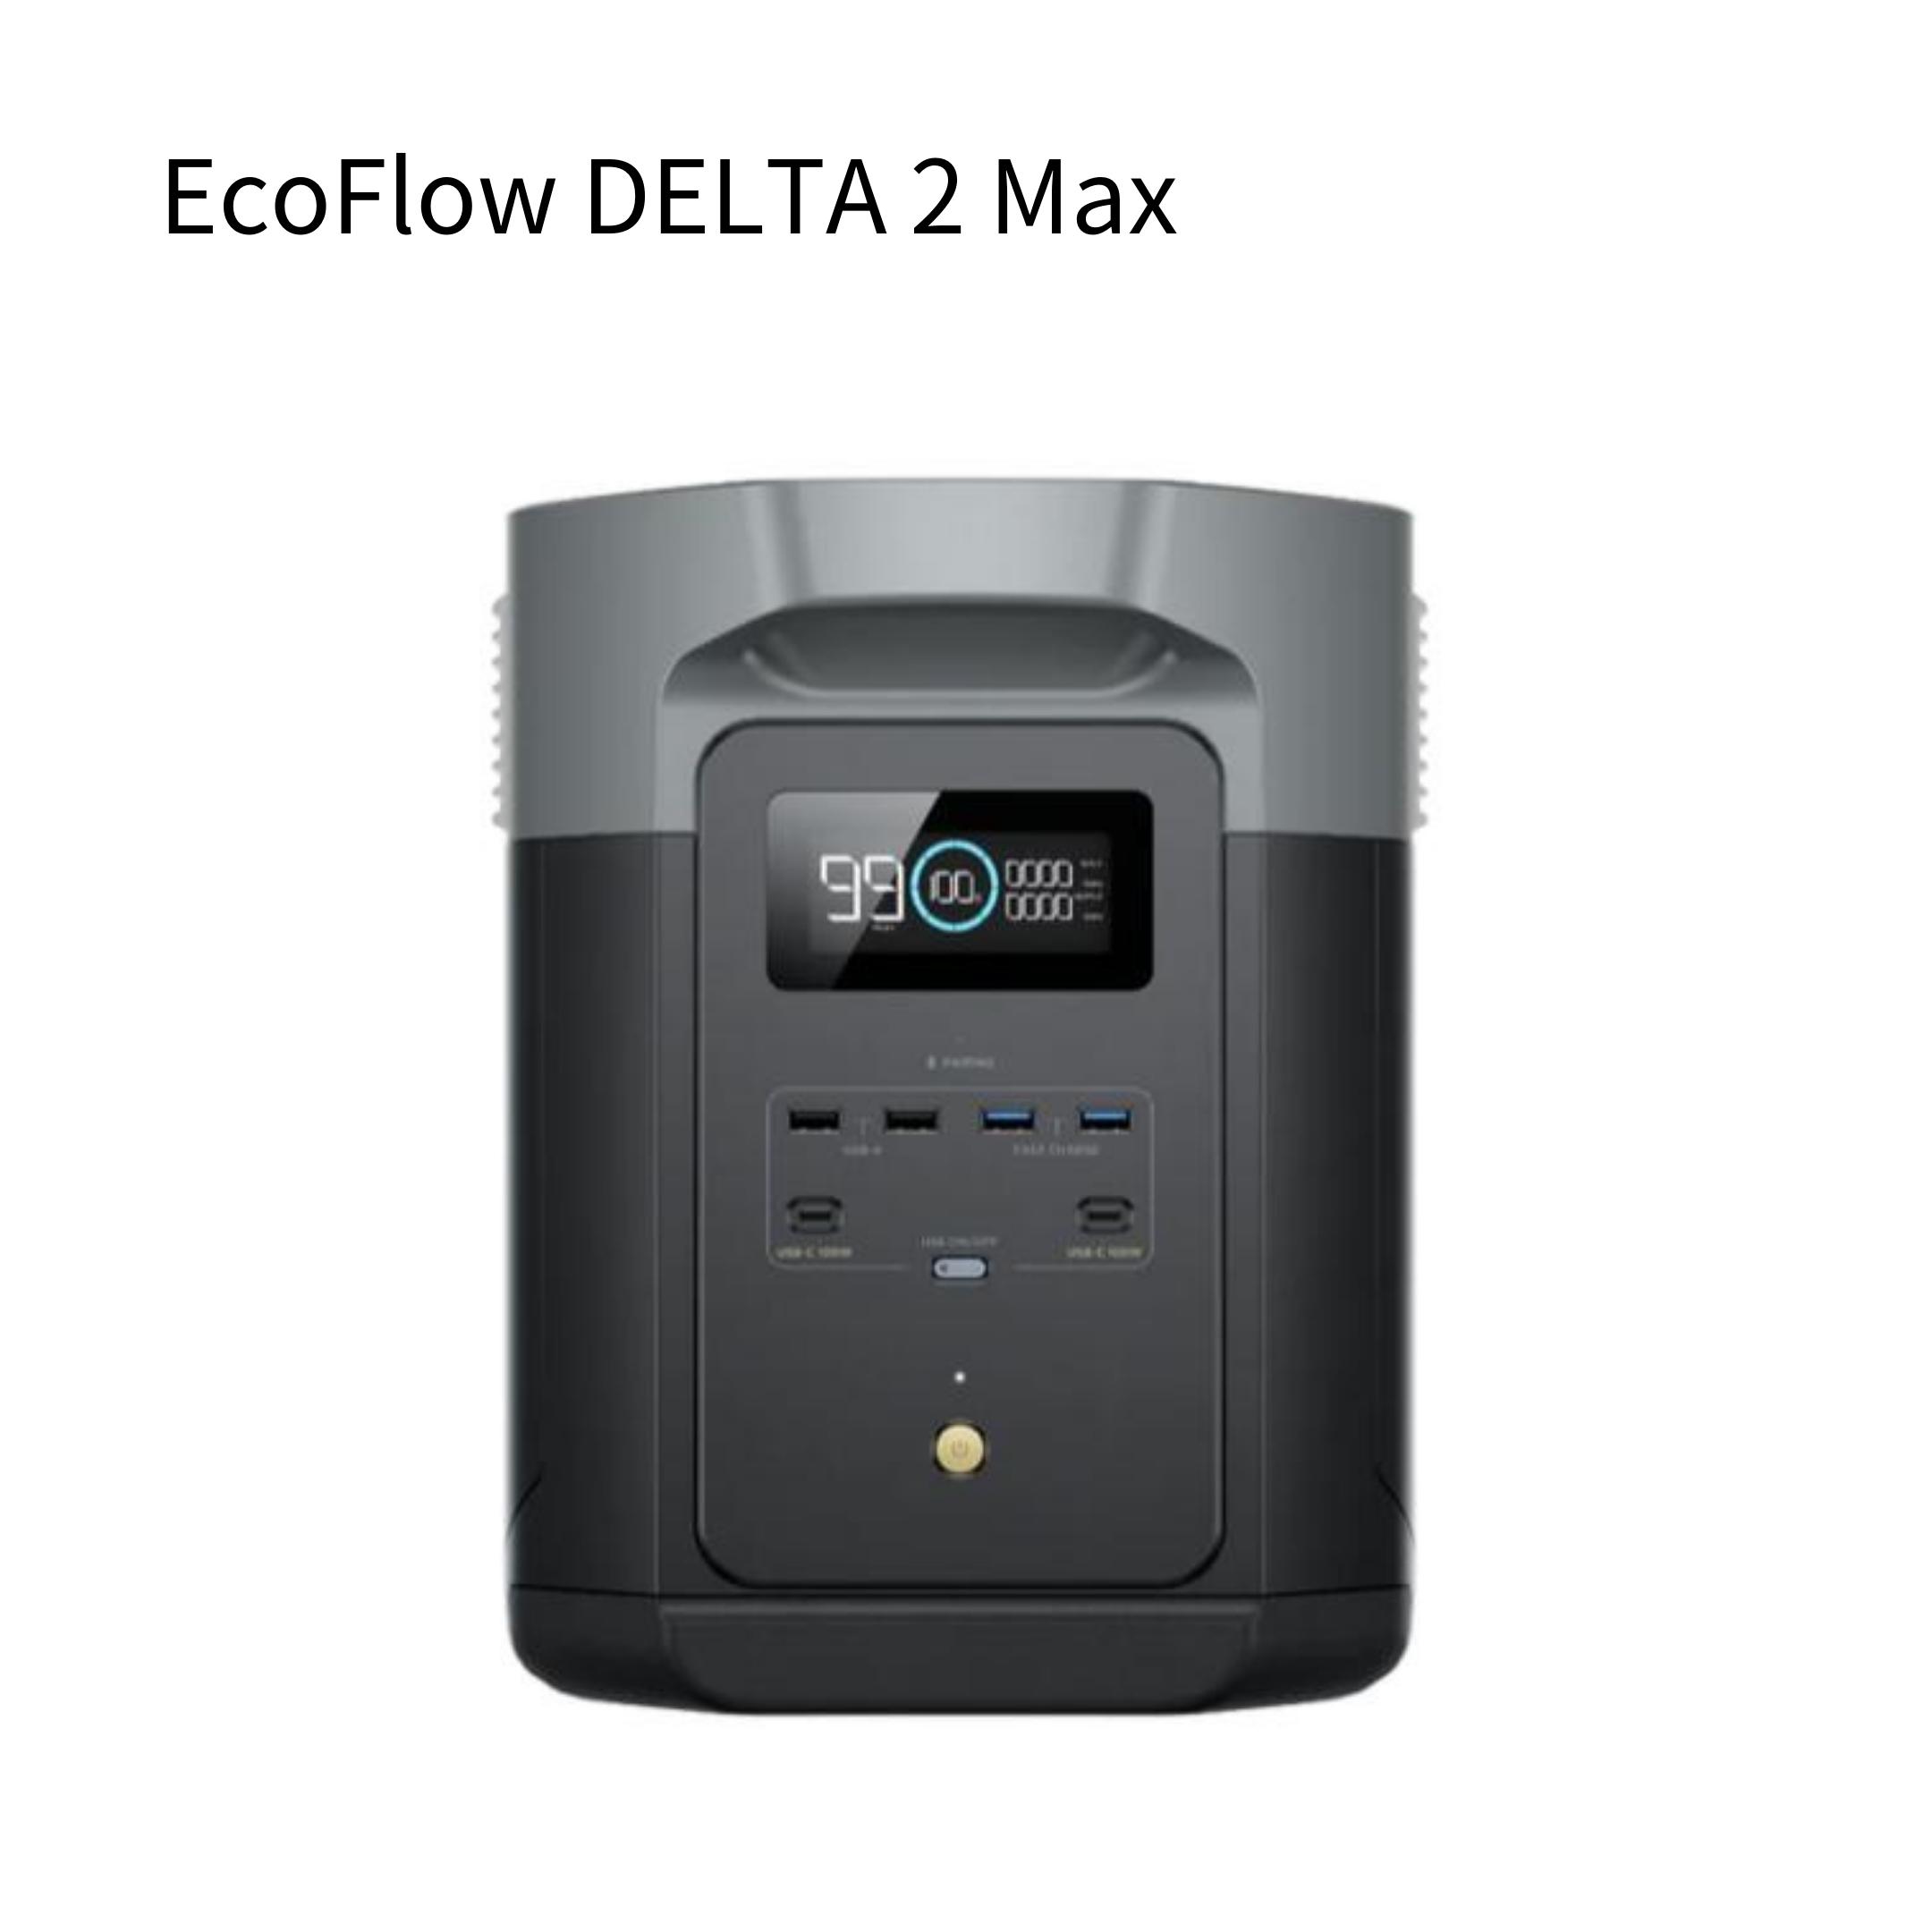 EcoFlow DELTA 2 Max eko flow 2048Wh Lynn acid iron portable power supply . cost estimation consultation welcome in voice Manufacturers 5 year guarantee 